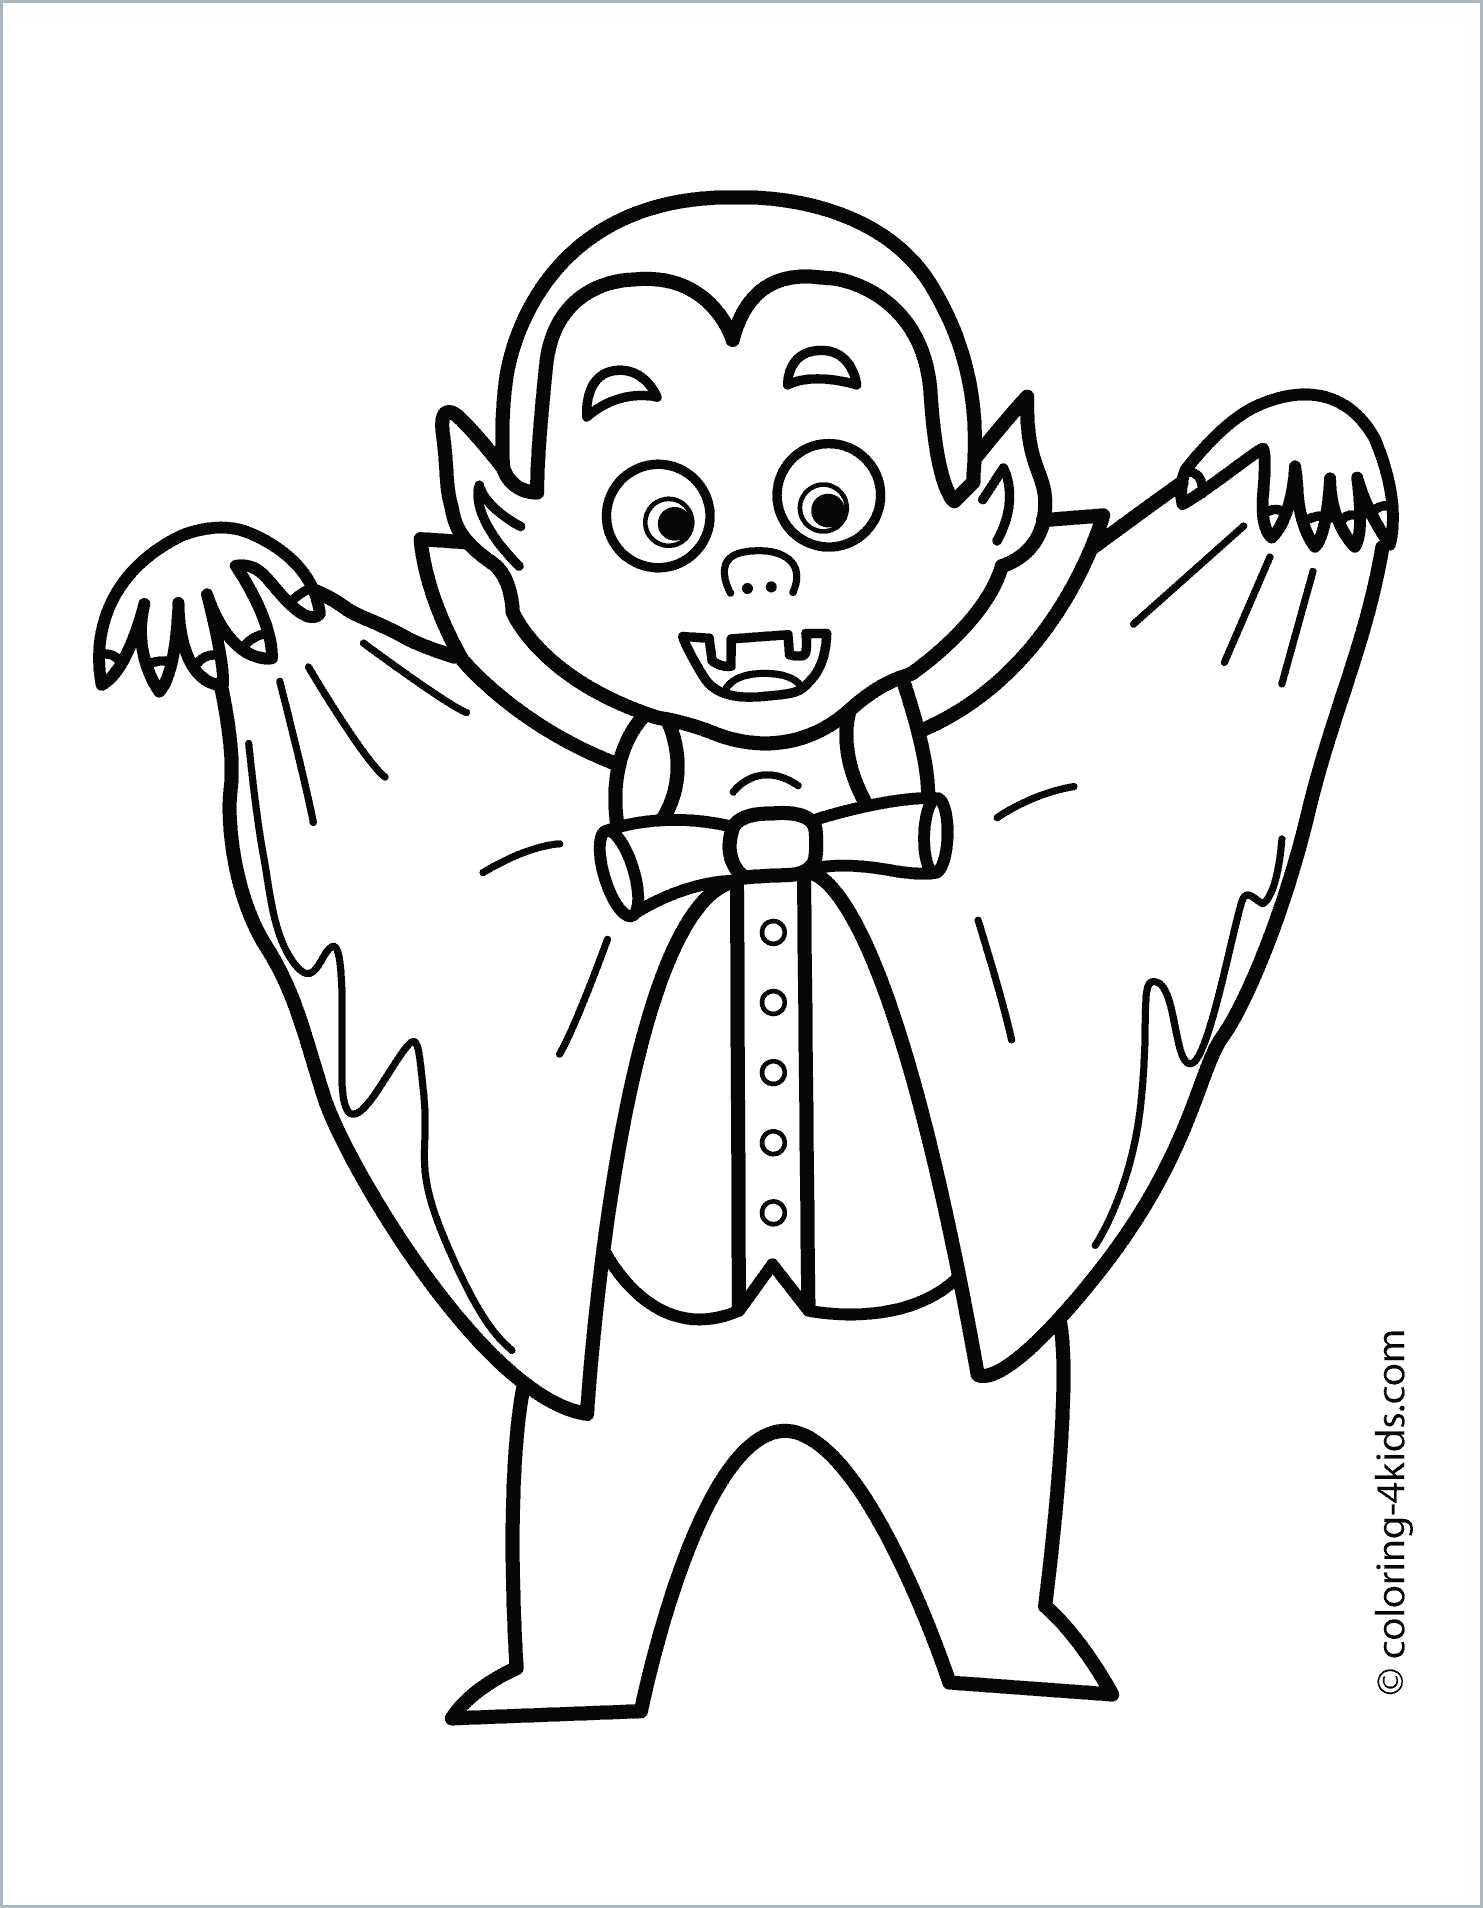 easy coloring pages halloween cute halloween vampire coloring pages coloring home of easy coloring pages halloween